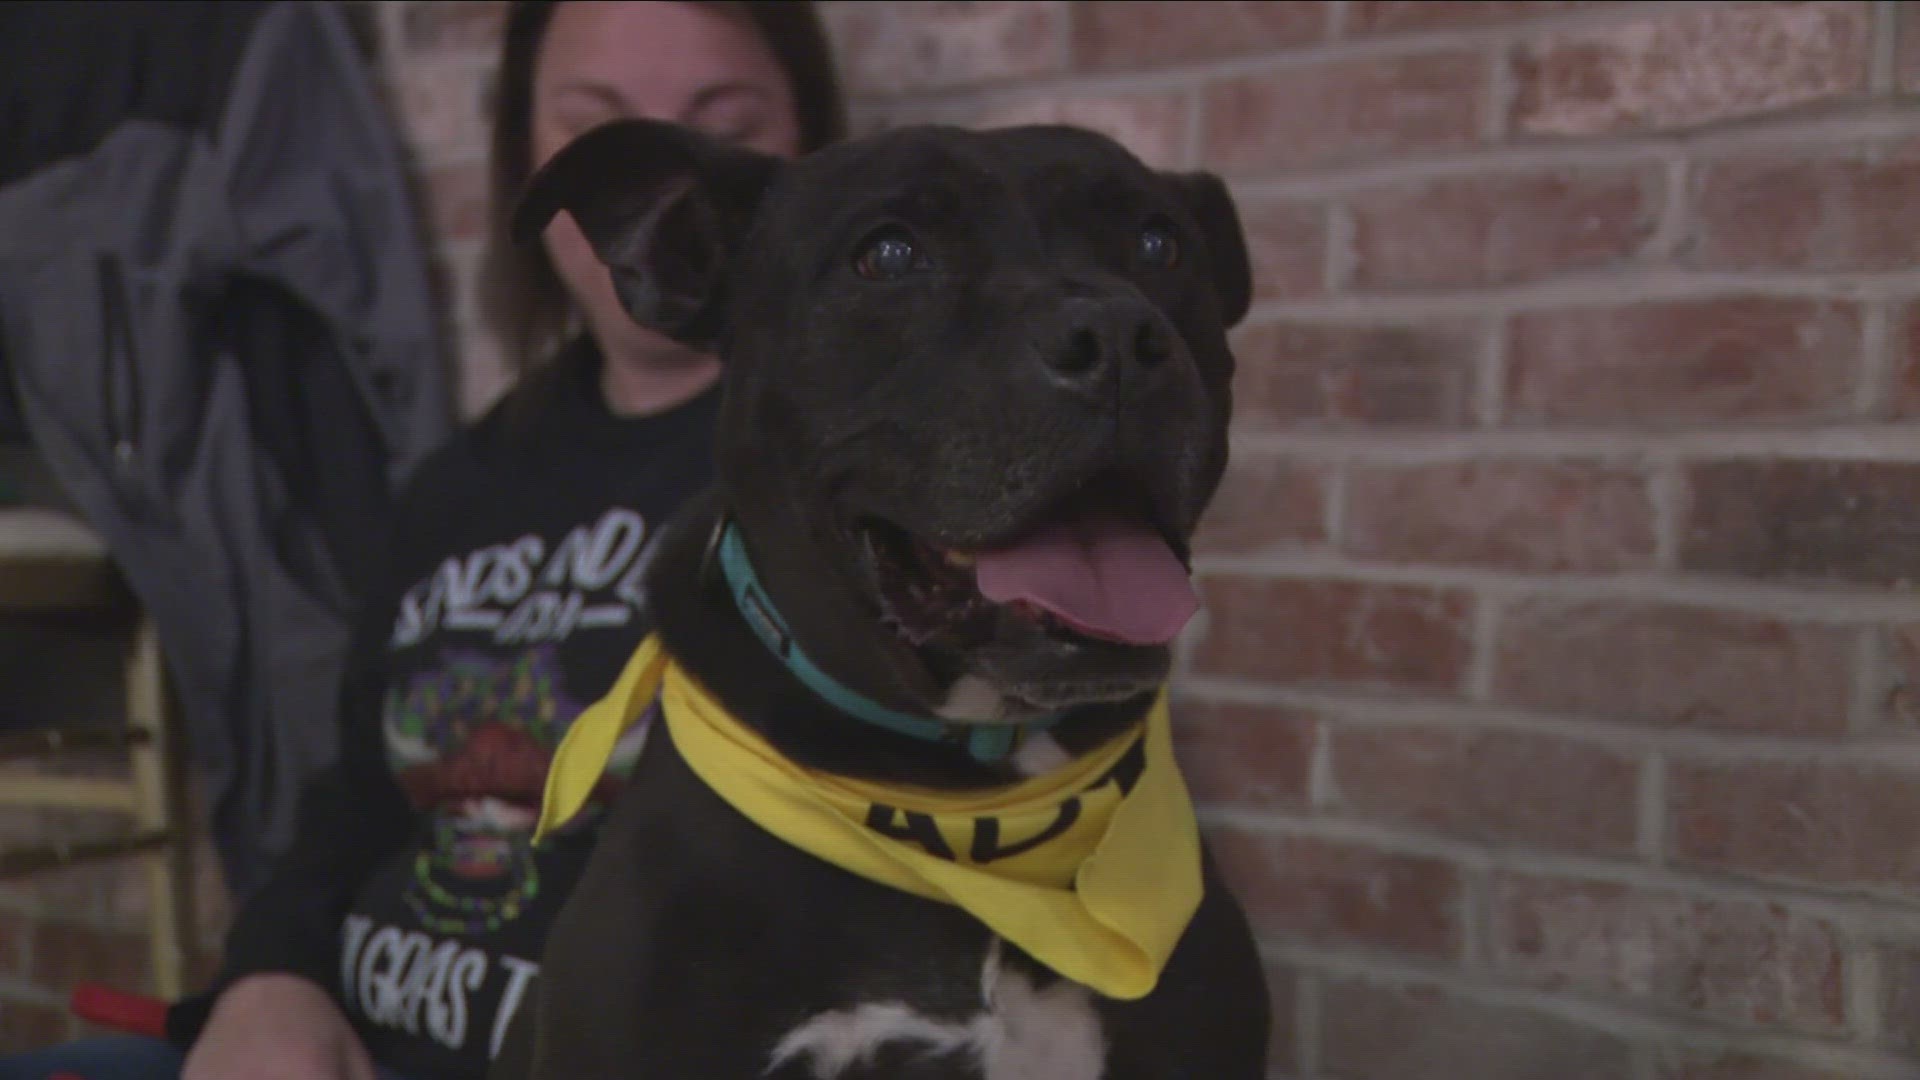 The fundraiser hopes to raise money for the adoptable dogs looking for new homes.